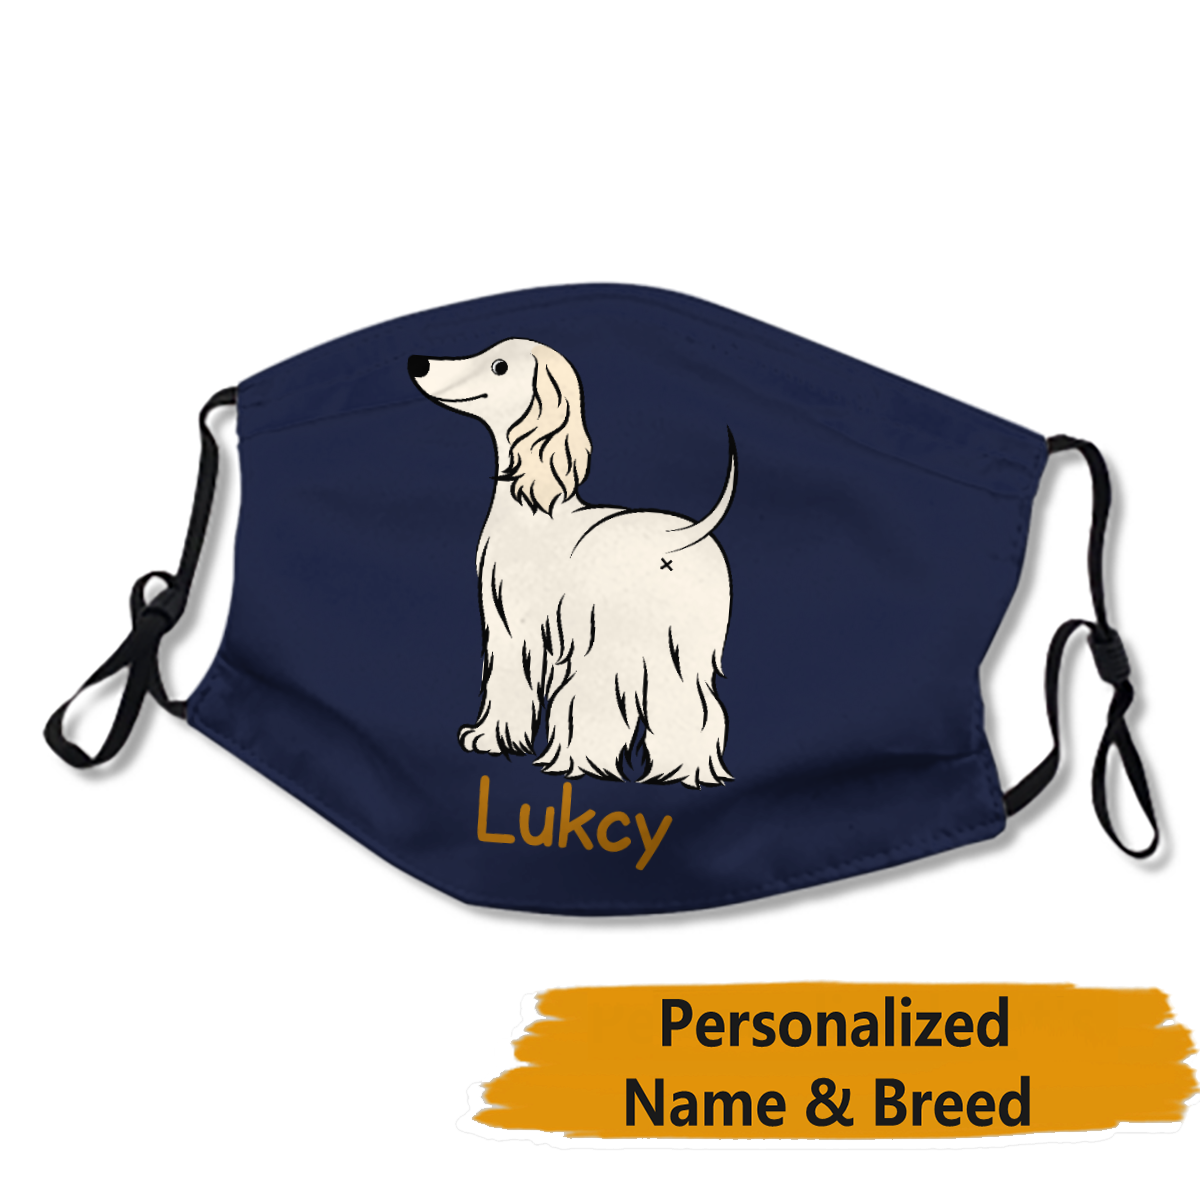 Personalized Dog's Name & Breed Face Mask No.3